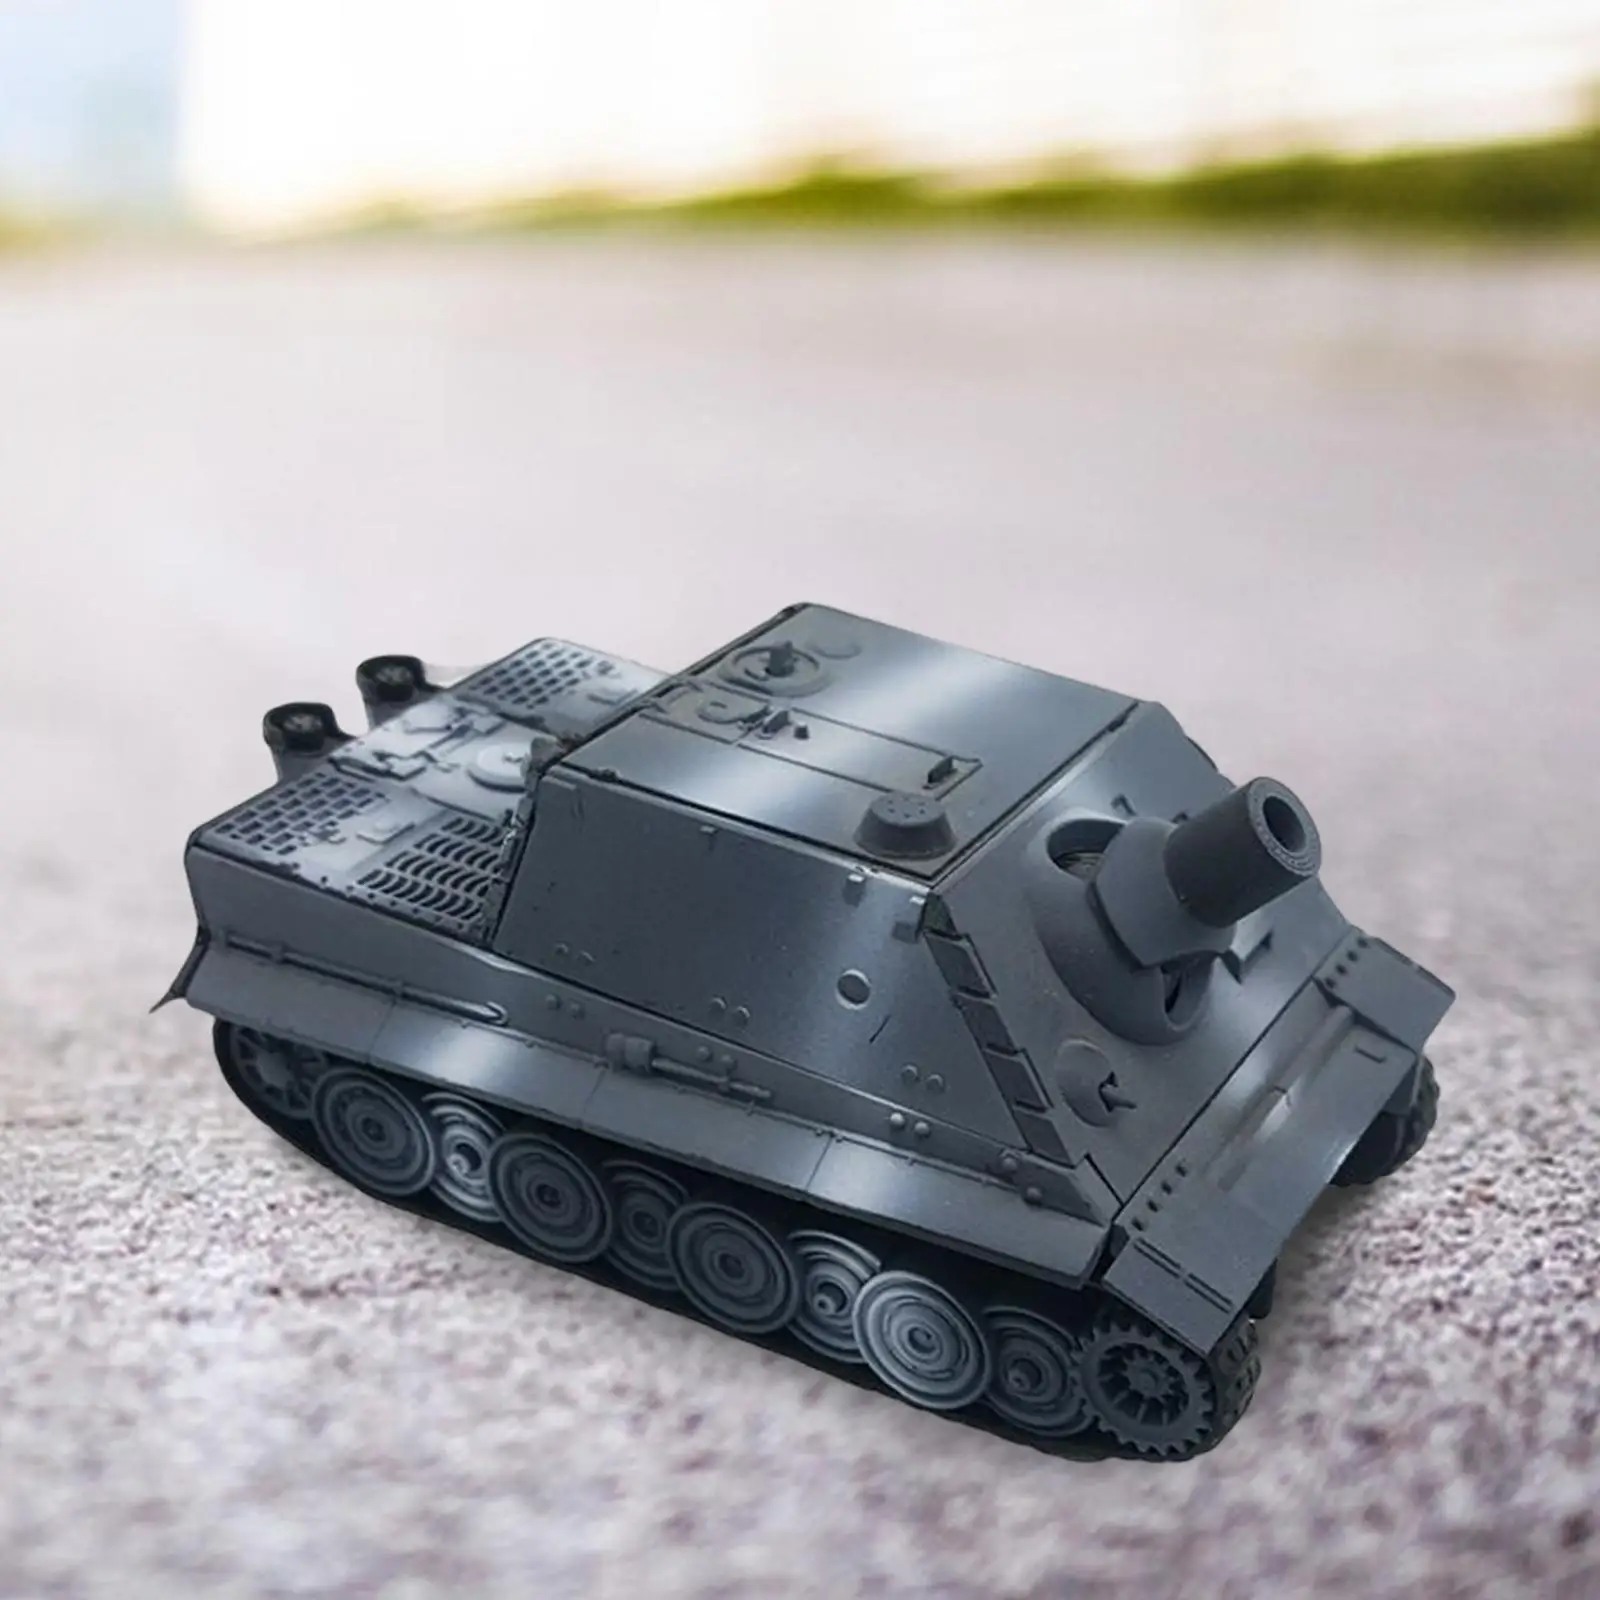 1/72 4D Assemble Tank Vehicle Model Toy Crafts Micro Landscape Toy Tank for Children Boys